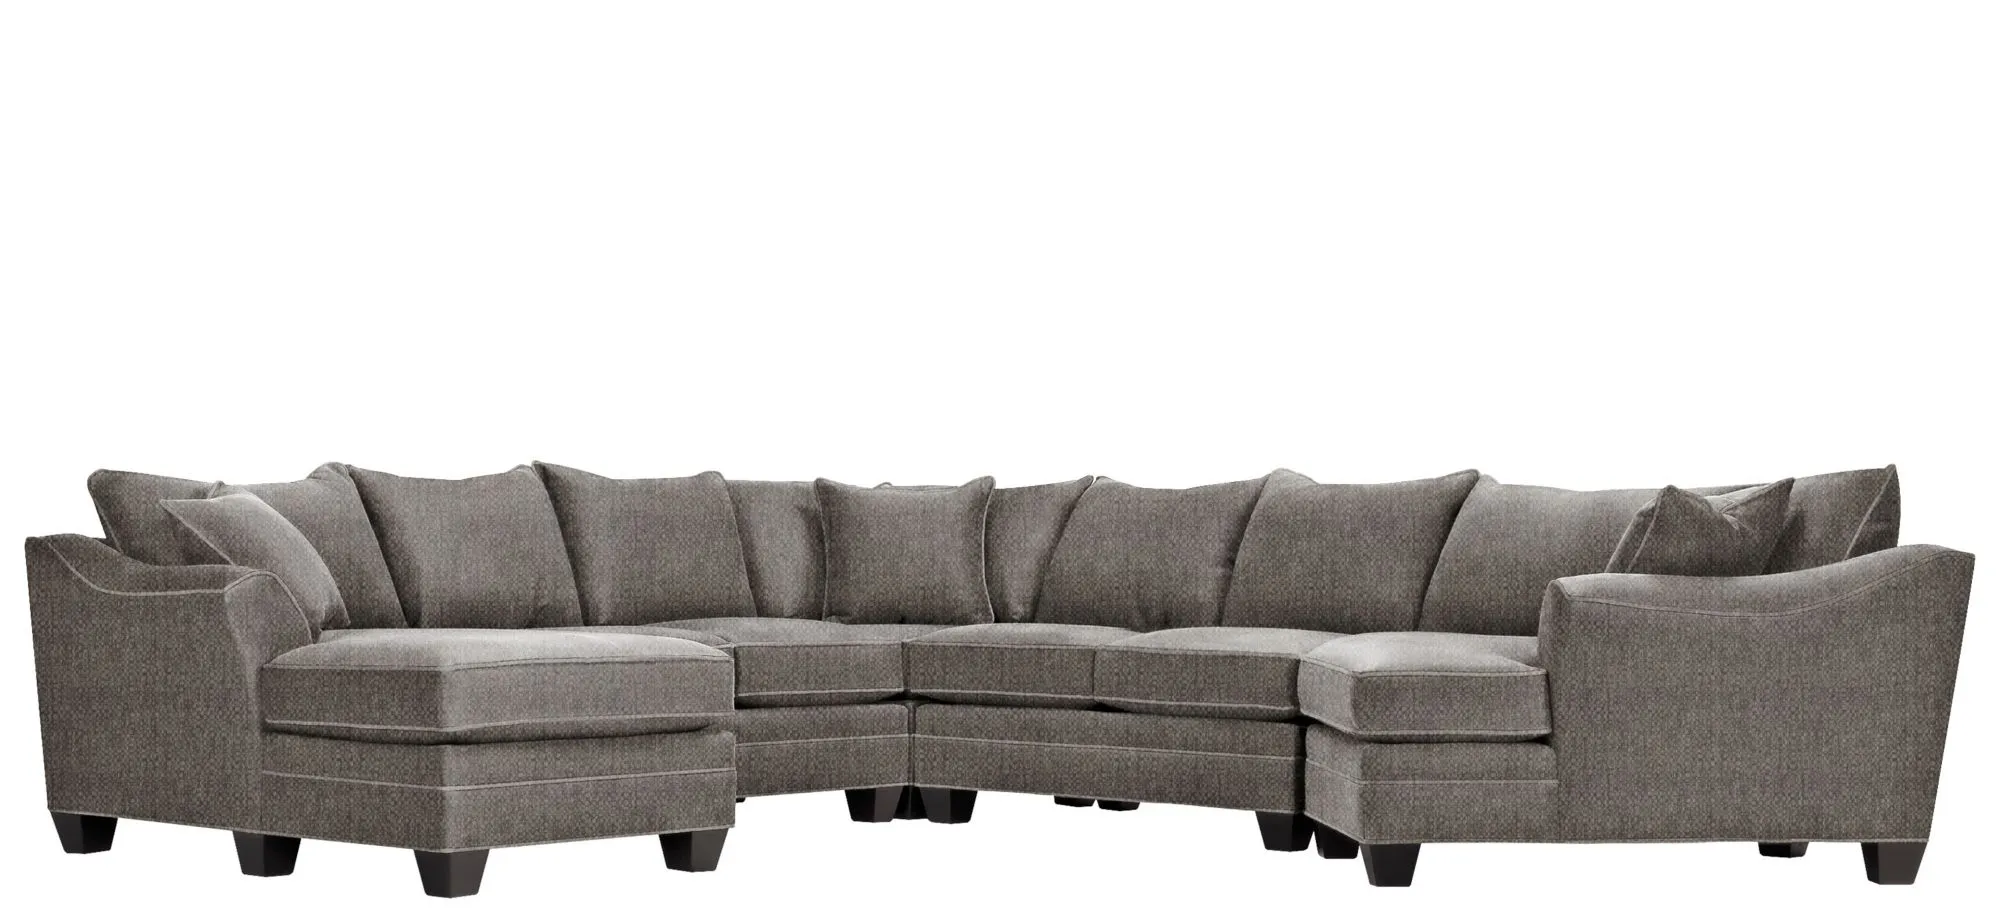 Foresthill 5-pc. Left Hand Facing Sectional Sofa in Sugar Shack Stone by H.M. Richards